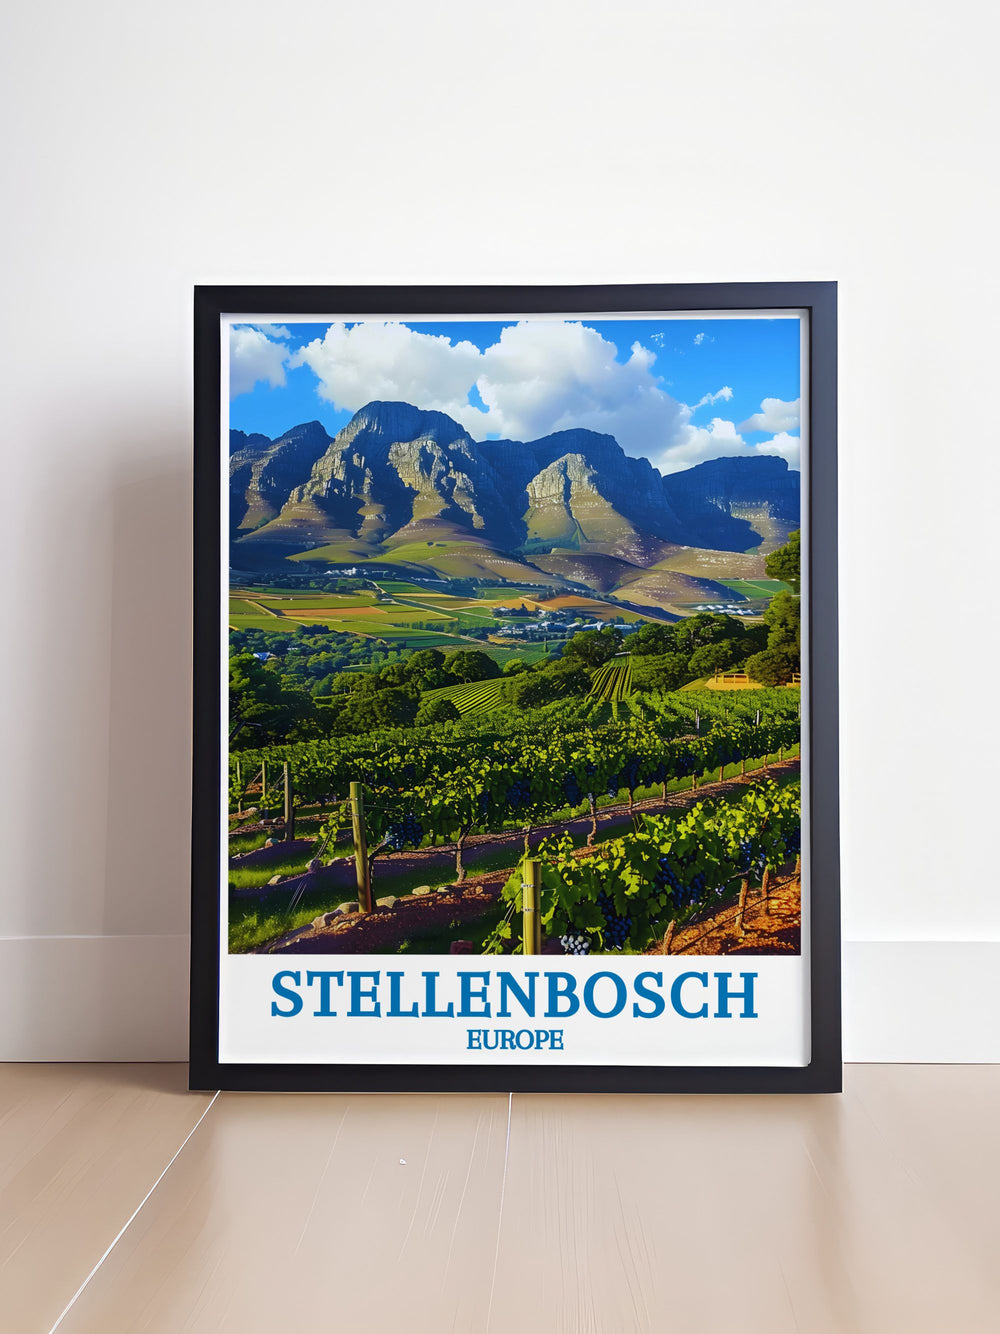 Celebrate the breathtaking landscapes of the Stellenbosch Wine Route with this detailed art print, showcasing the verdant vineyards and majestic mountains.